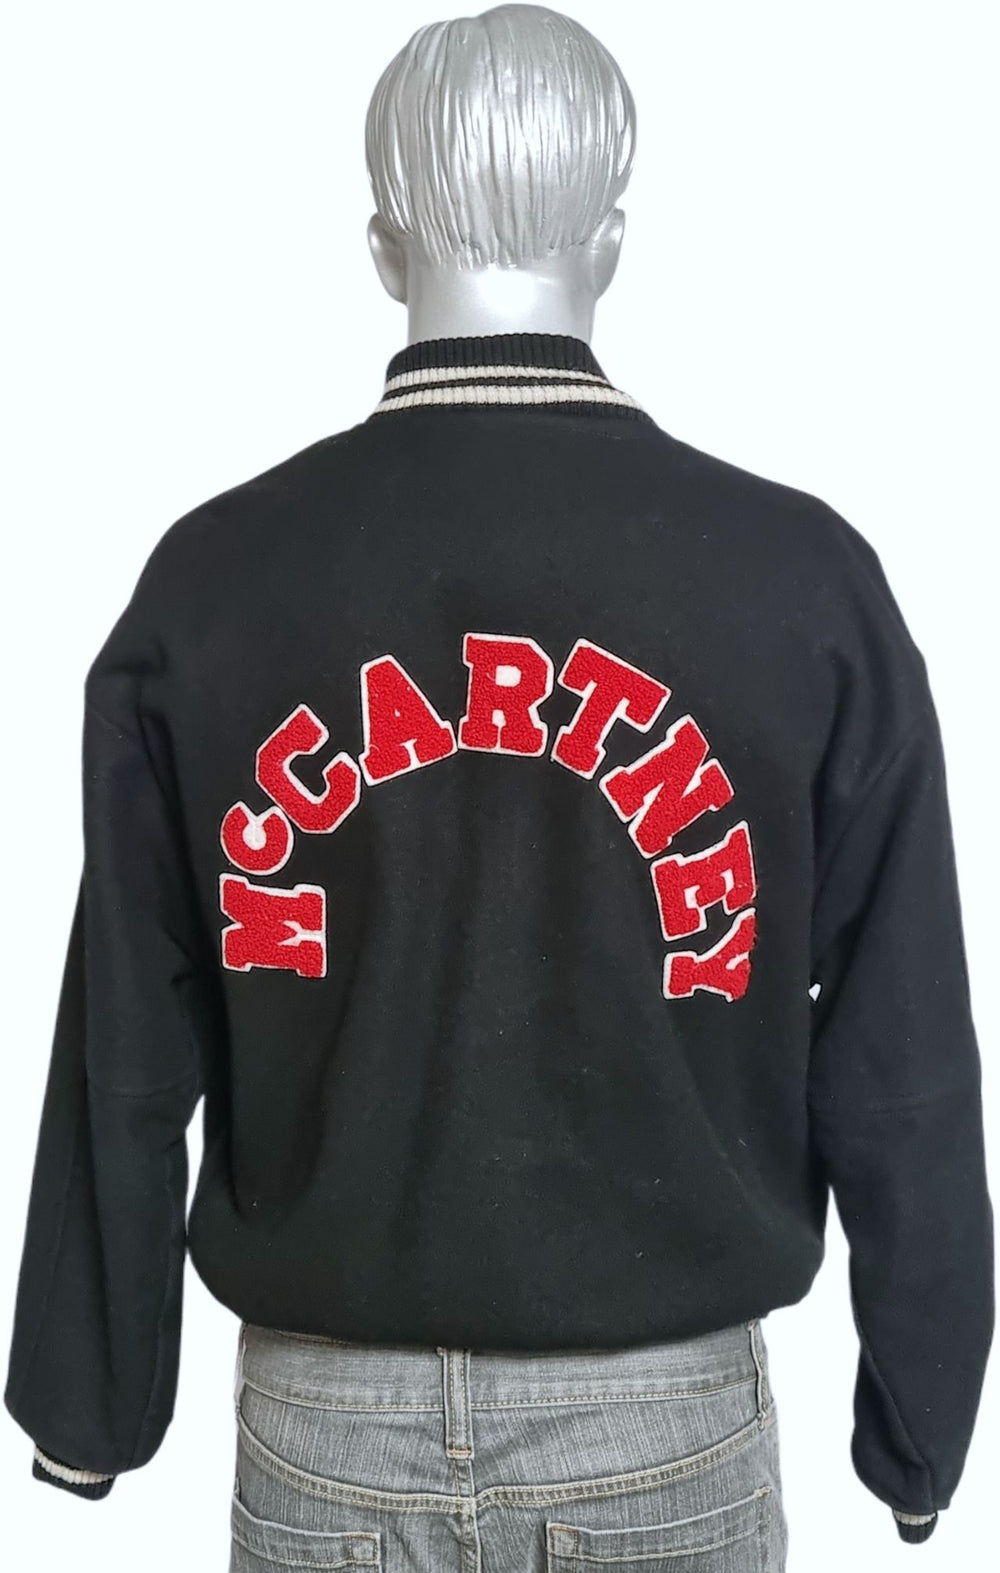 Paul McCartney and Wings The New World Tour - Varsity (L) US jacket